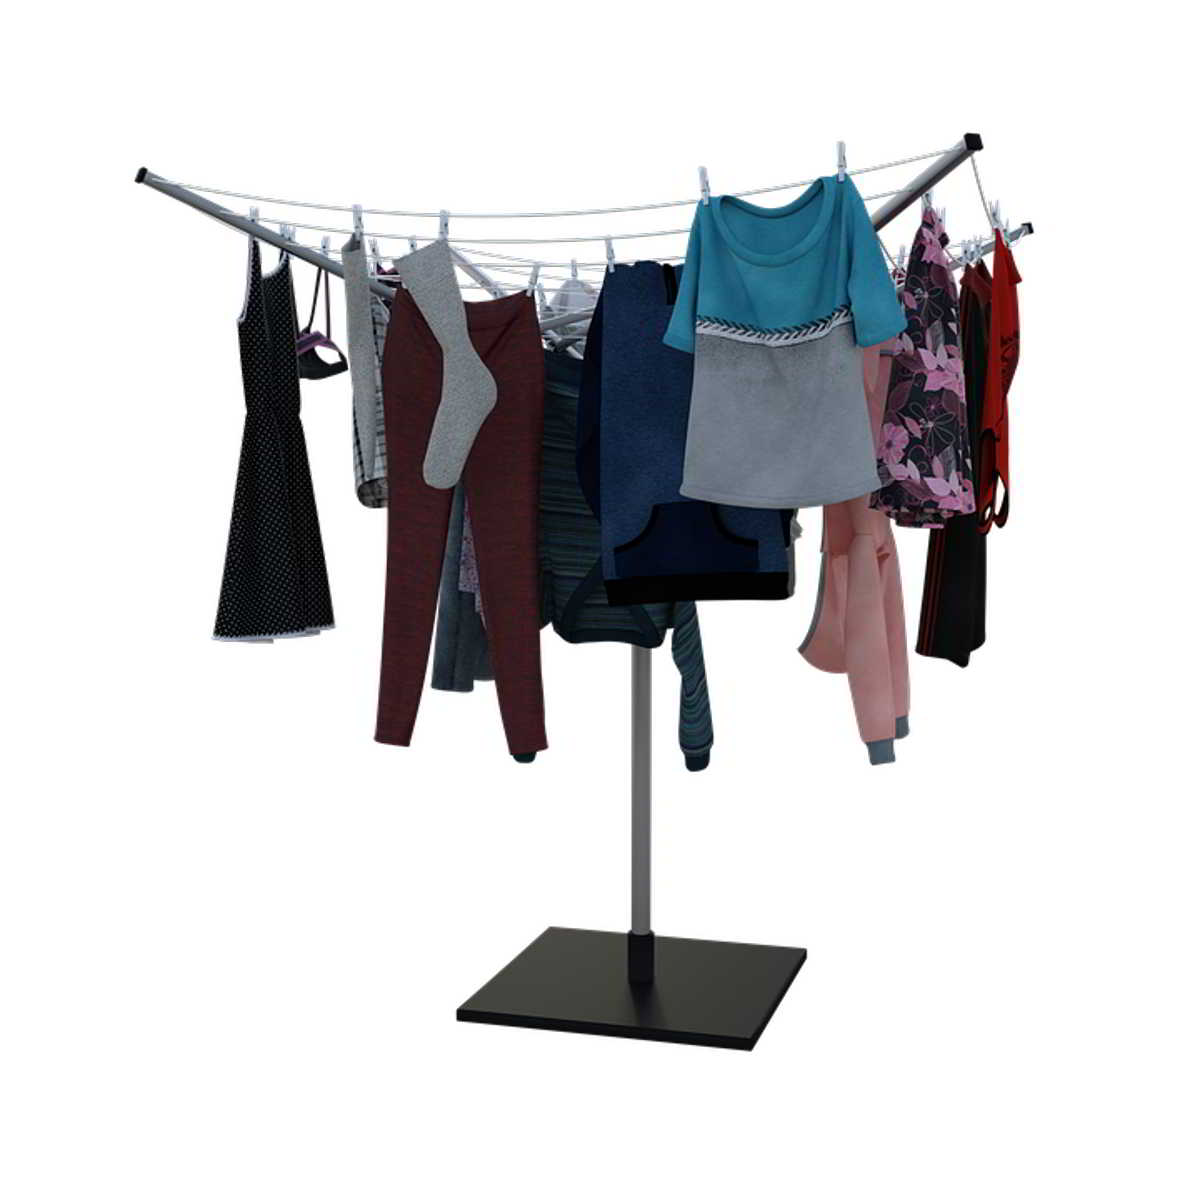 How to dry clothes faster without a dryer